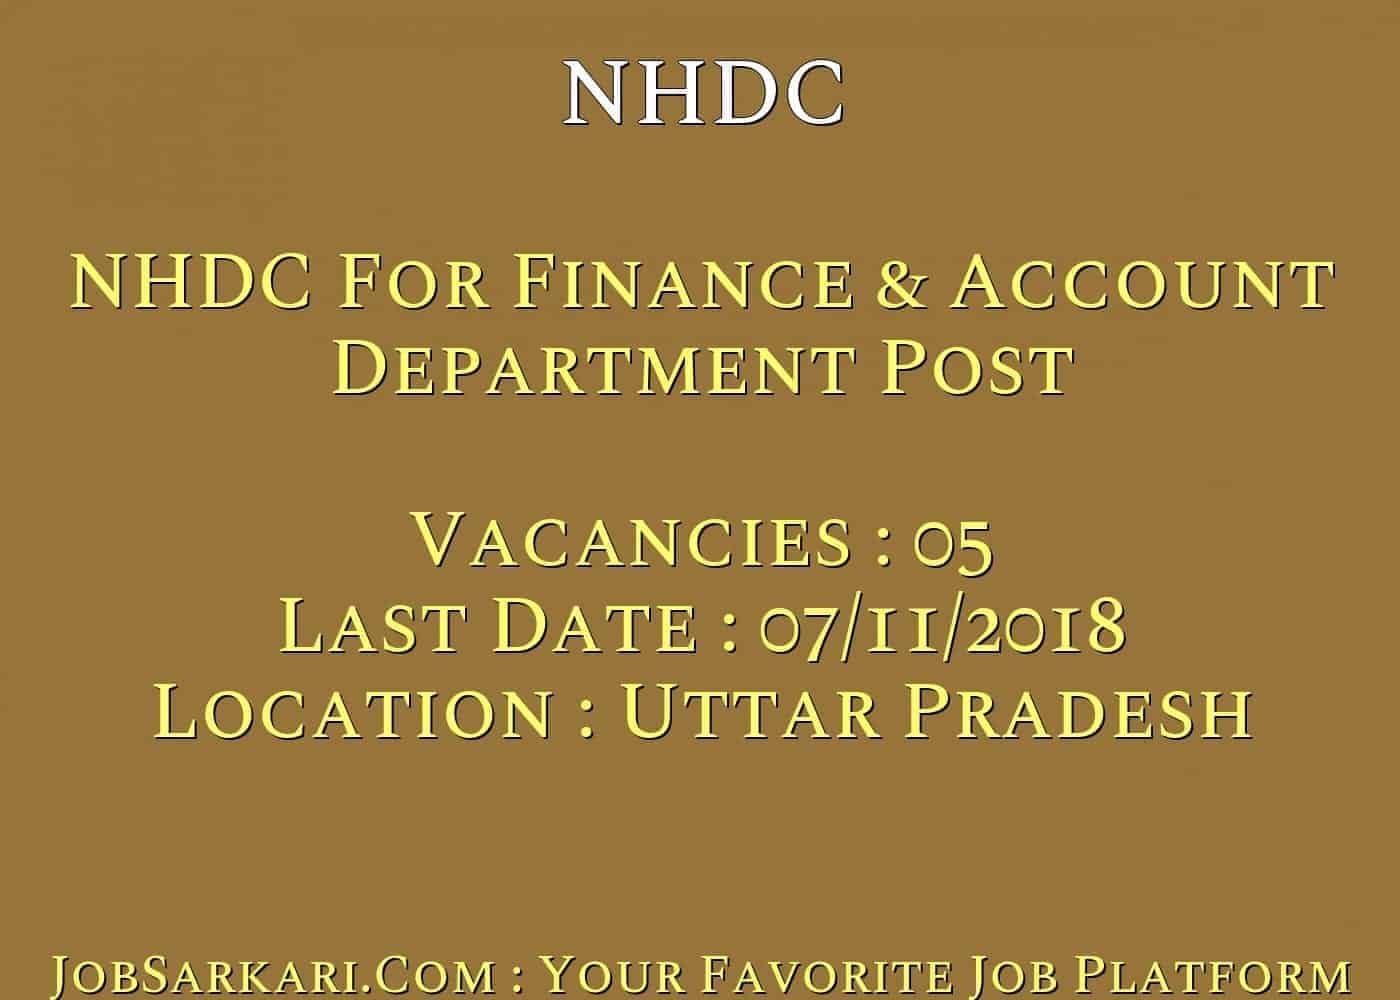 NHDC Recruitment 2018 For Finance & Account Department Posts